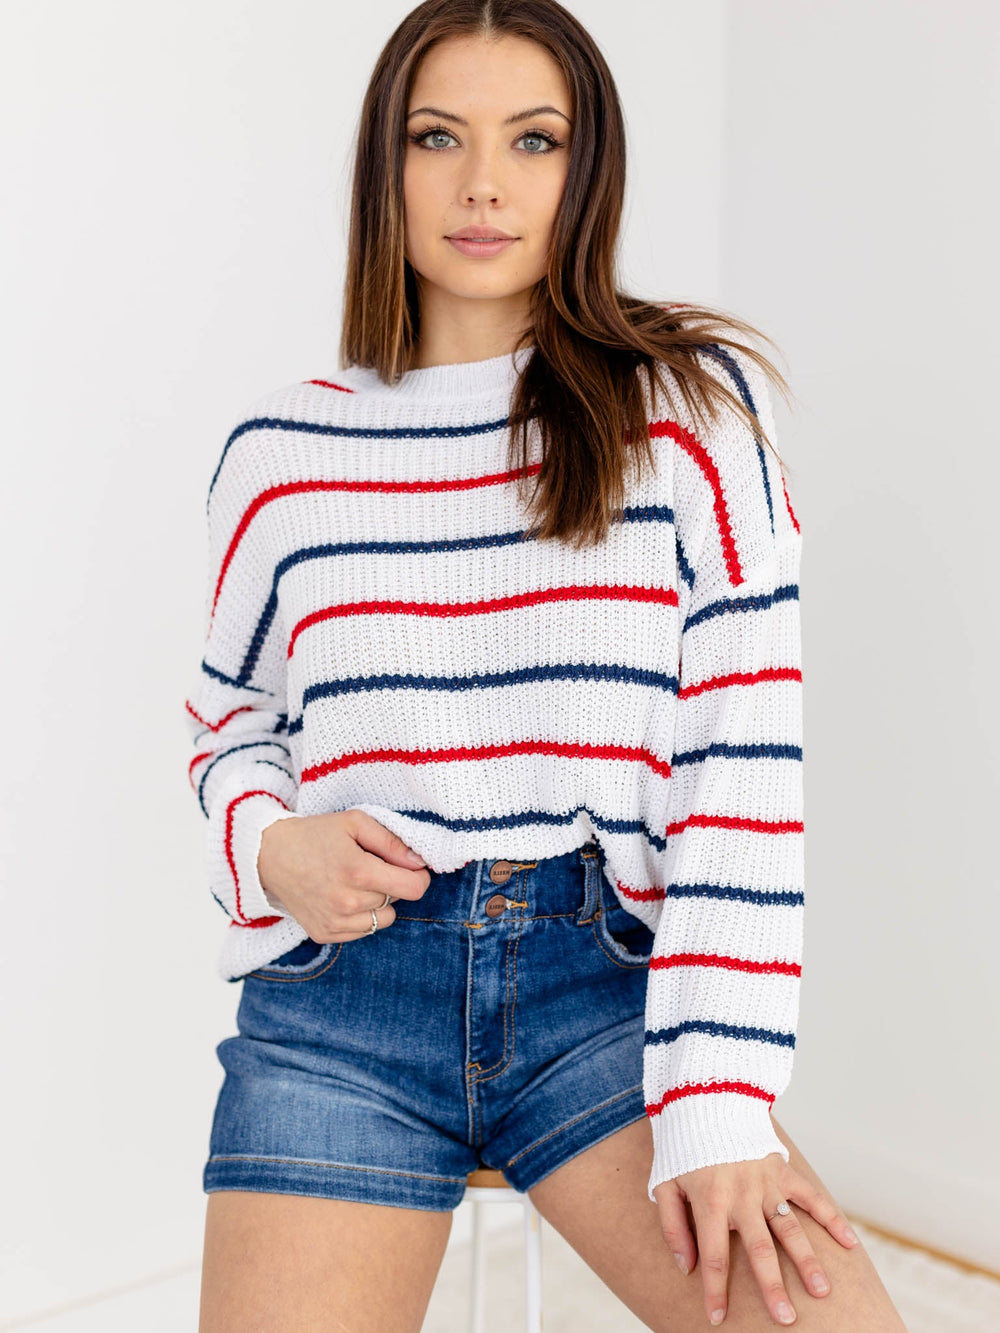 Red & Blue Stripe Sweater TopSweaters